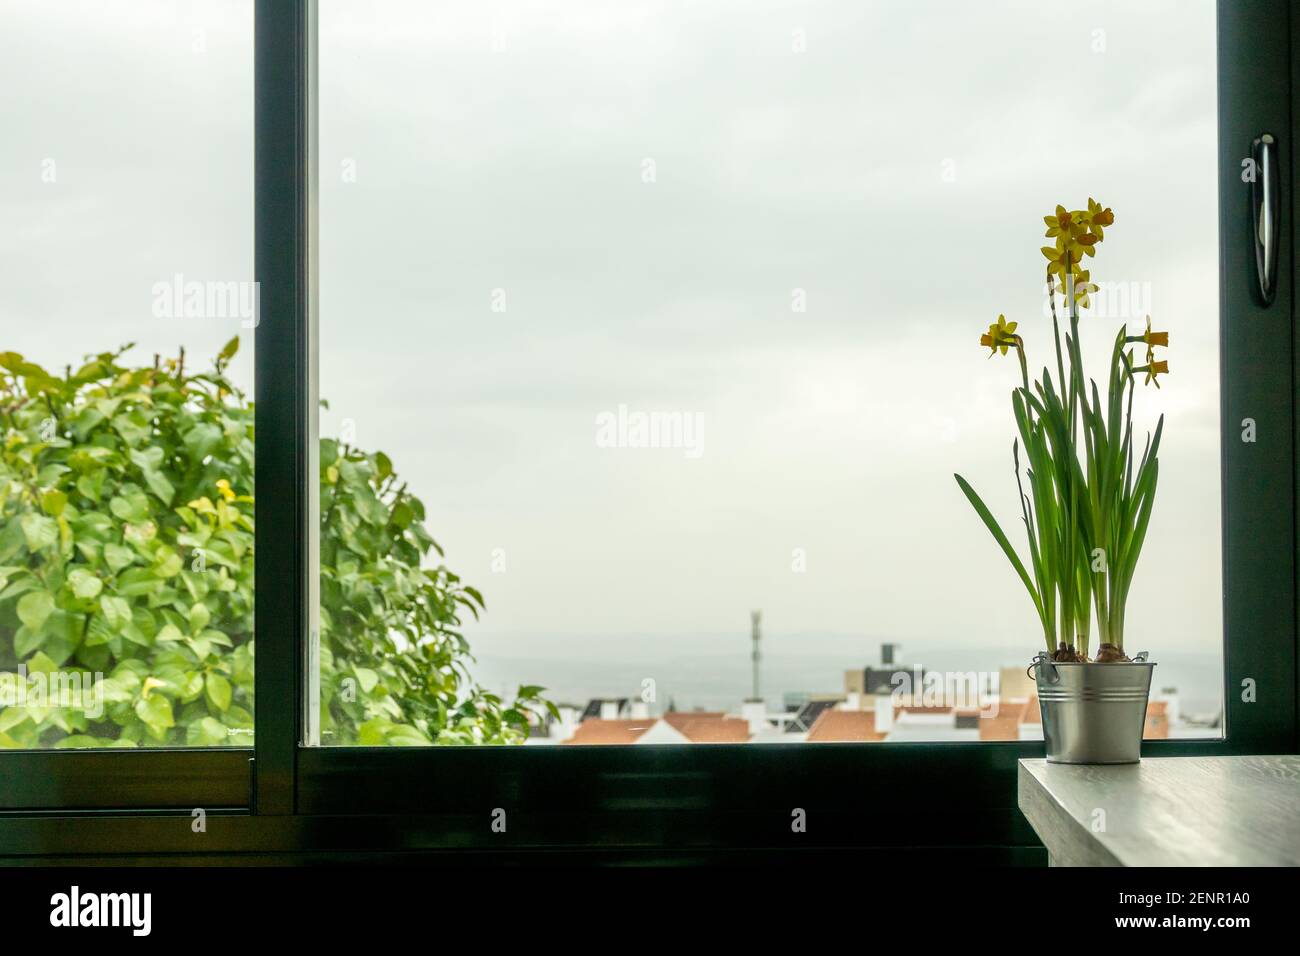 Interior decoration: Yellow daffodils (narcissus duke of rothesay) in an aluminum pot next to a window Stock Photo